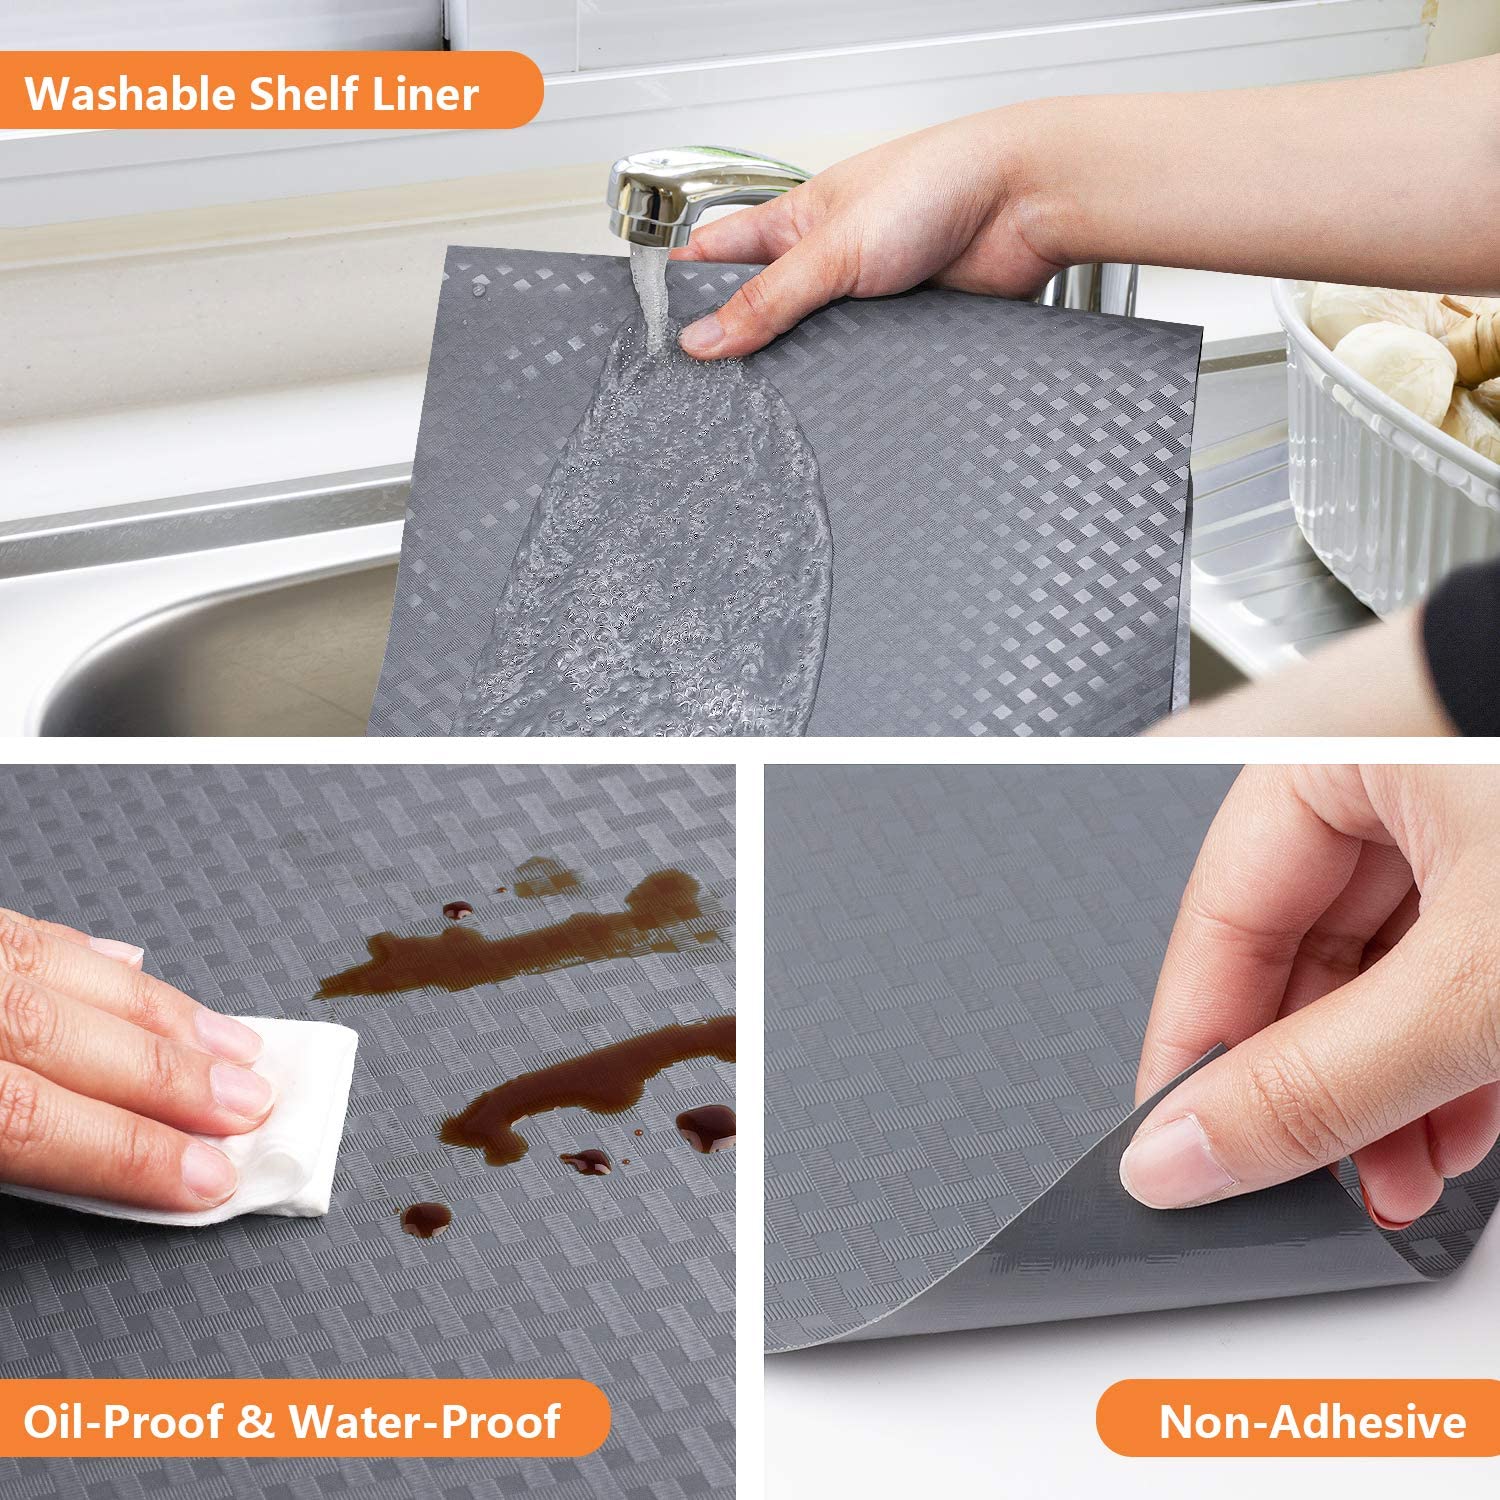 Non-Slip EVA Kitchen Shelf Liners for Cabinets, Refrigerator, Drawers, and Shelves - Waterproof & Oil-Proof, Non Adhesive, 11.8 x 59 Inches - Gray 5